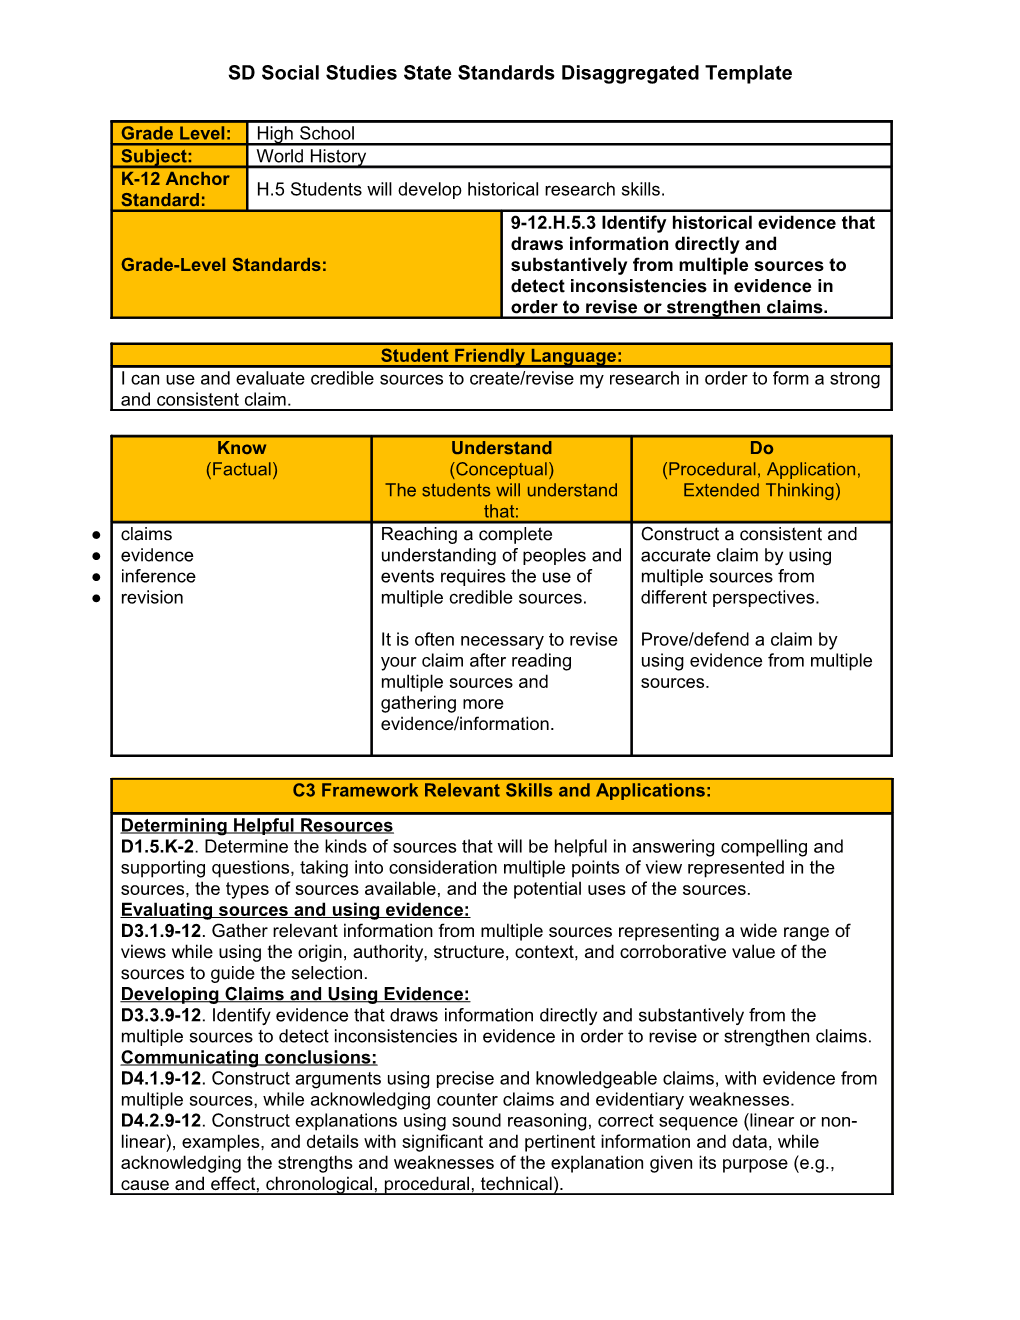 SD Social Studies State Standards Disaggregated Template